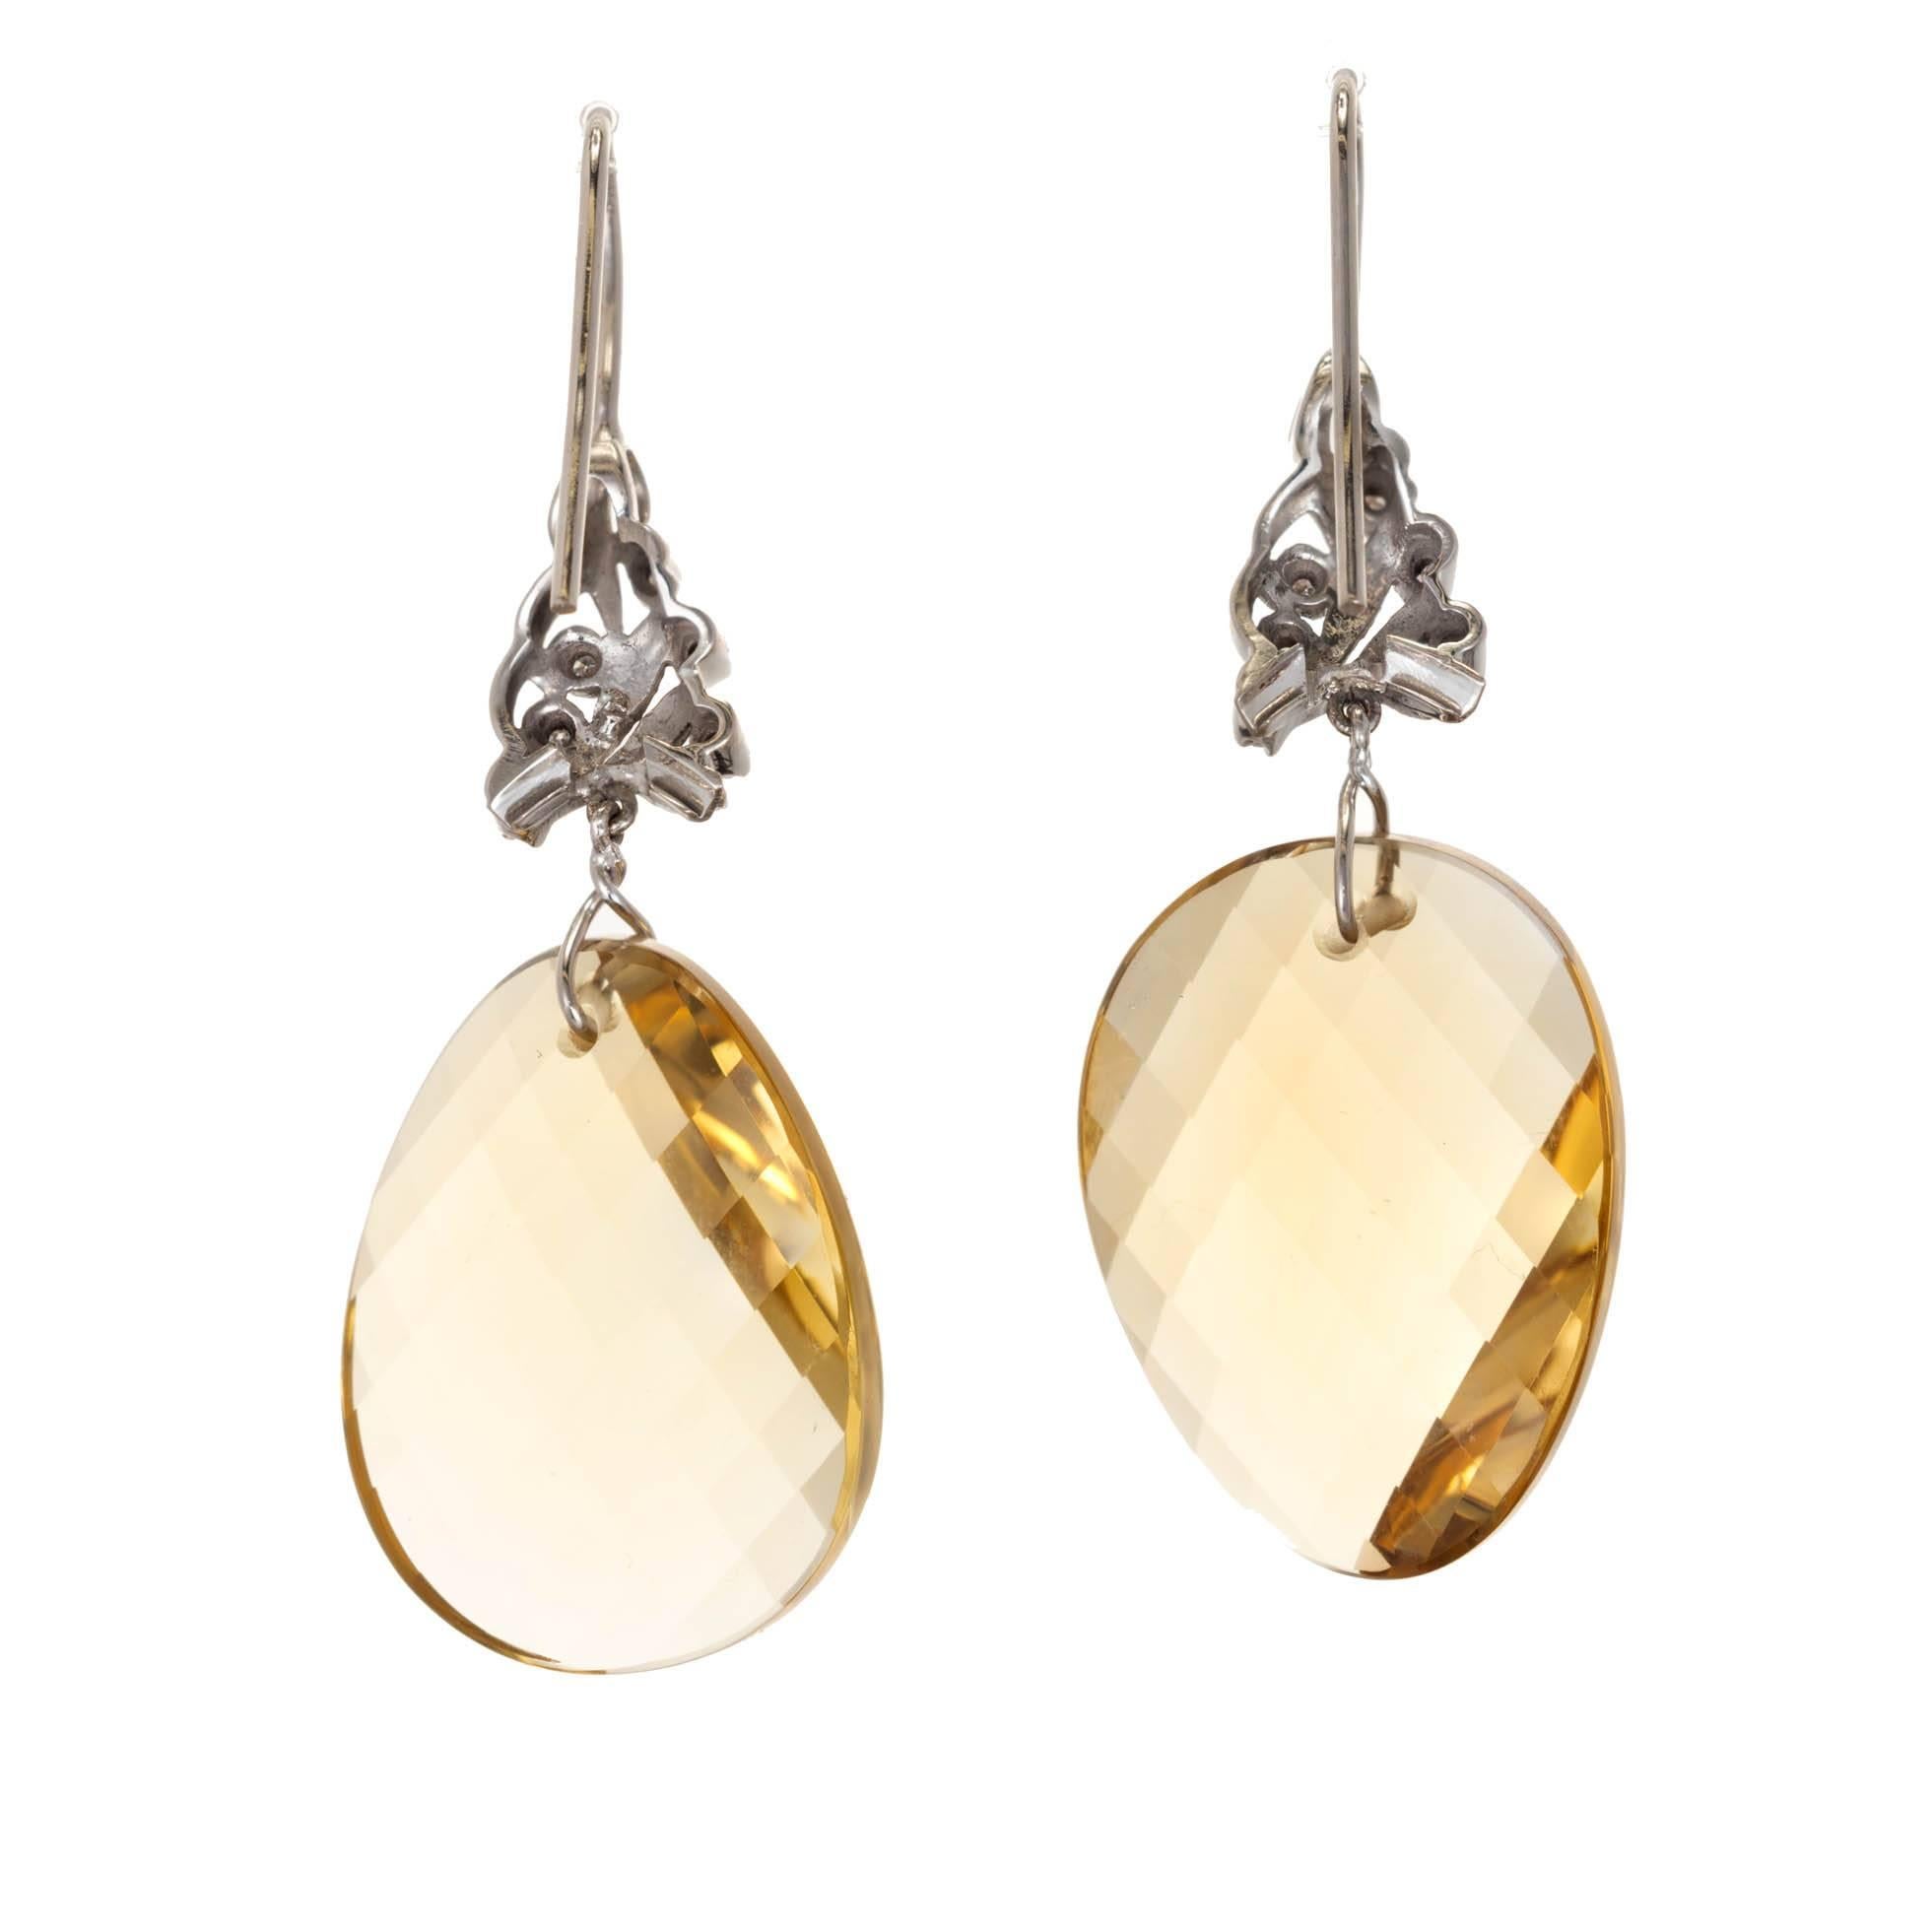 14k white gold wire top diamond dangle earrings with swirl faceted free form natural untreated 43.00ct lemon quartz dangles.

2 yellow citrine oval 25.19 x 18.22 golden yellow all natural 43.00ct total
12 round Diamond H, SI Approx.  .15ct